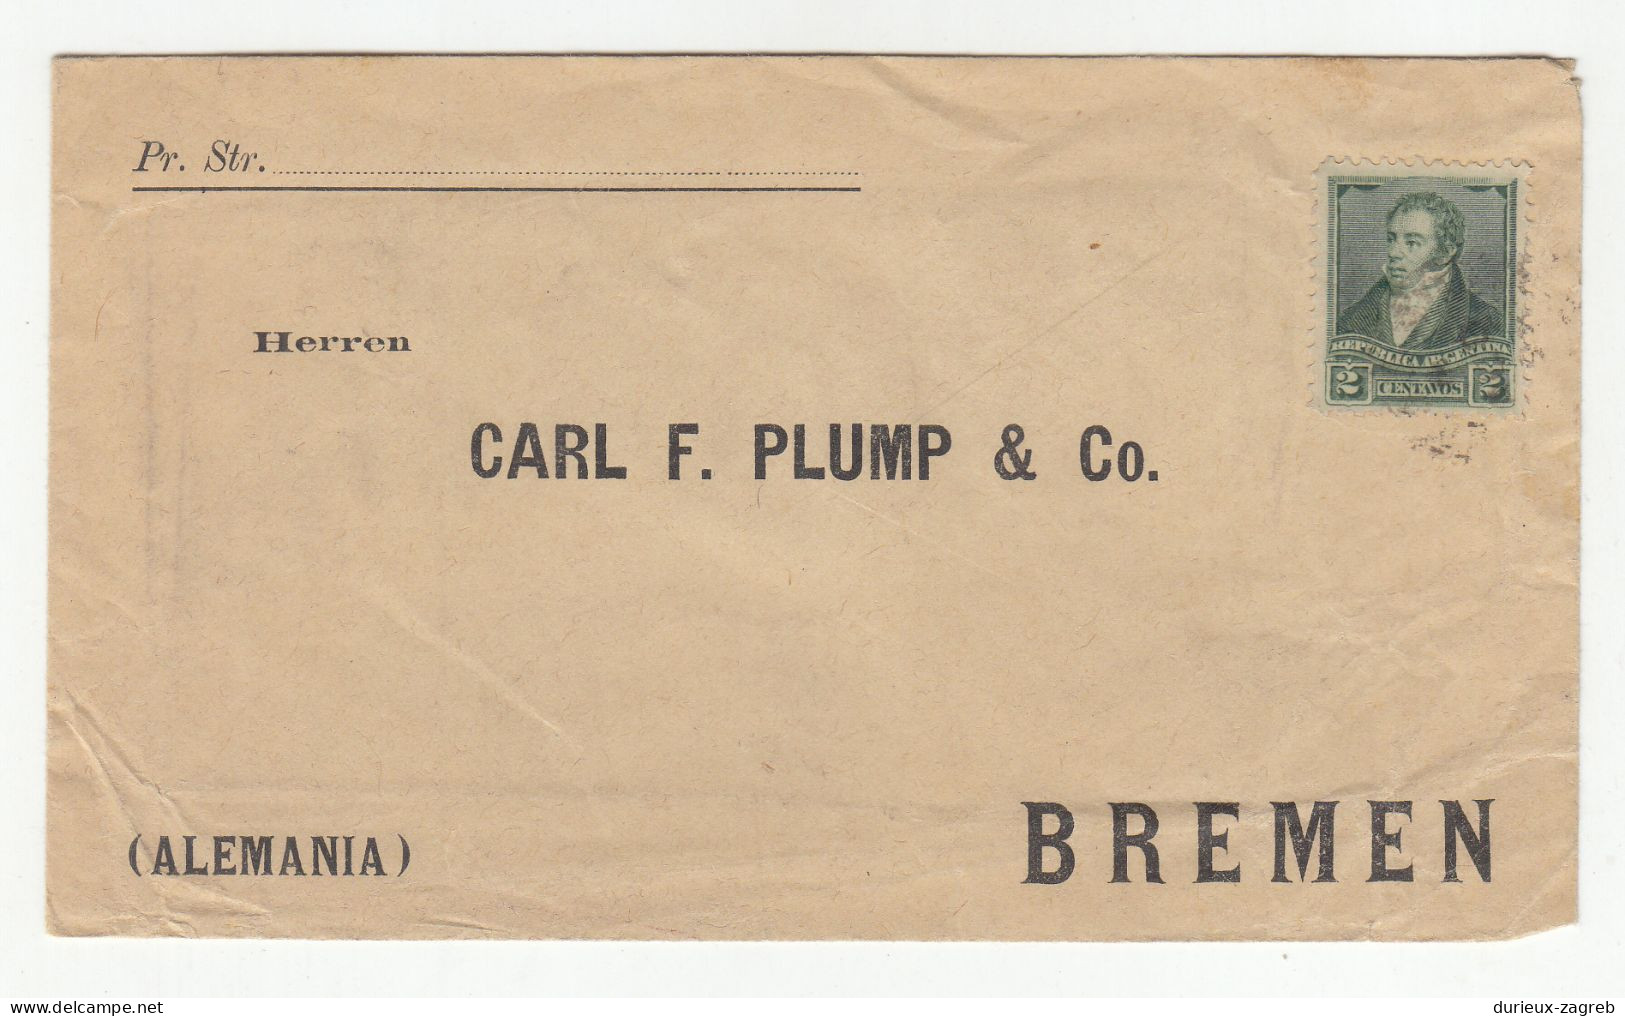 Ernesto Tornquist Y Cia Company Letter Cal F. Plump & Co. Bremen Reply Cover Posted? B231120 - Covers & Documents